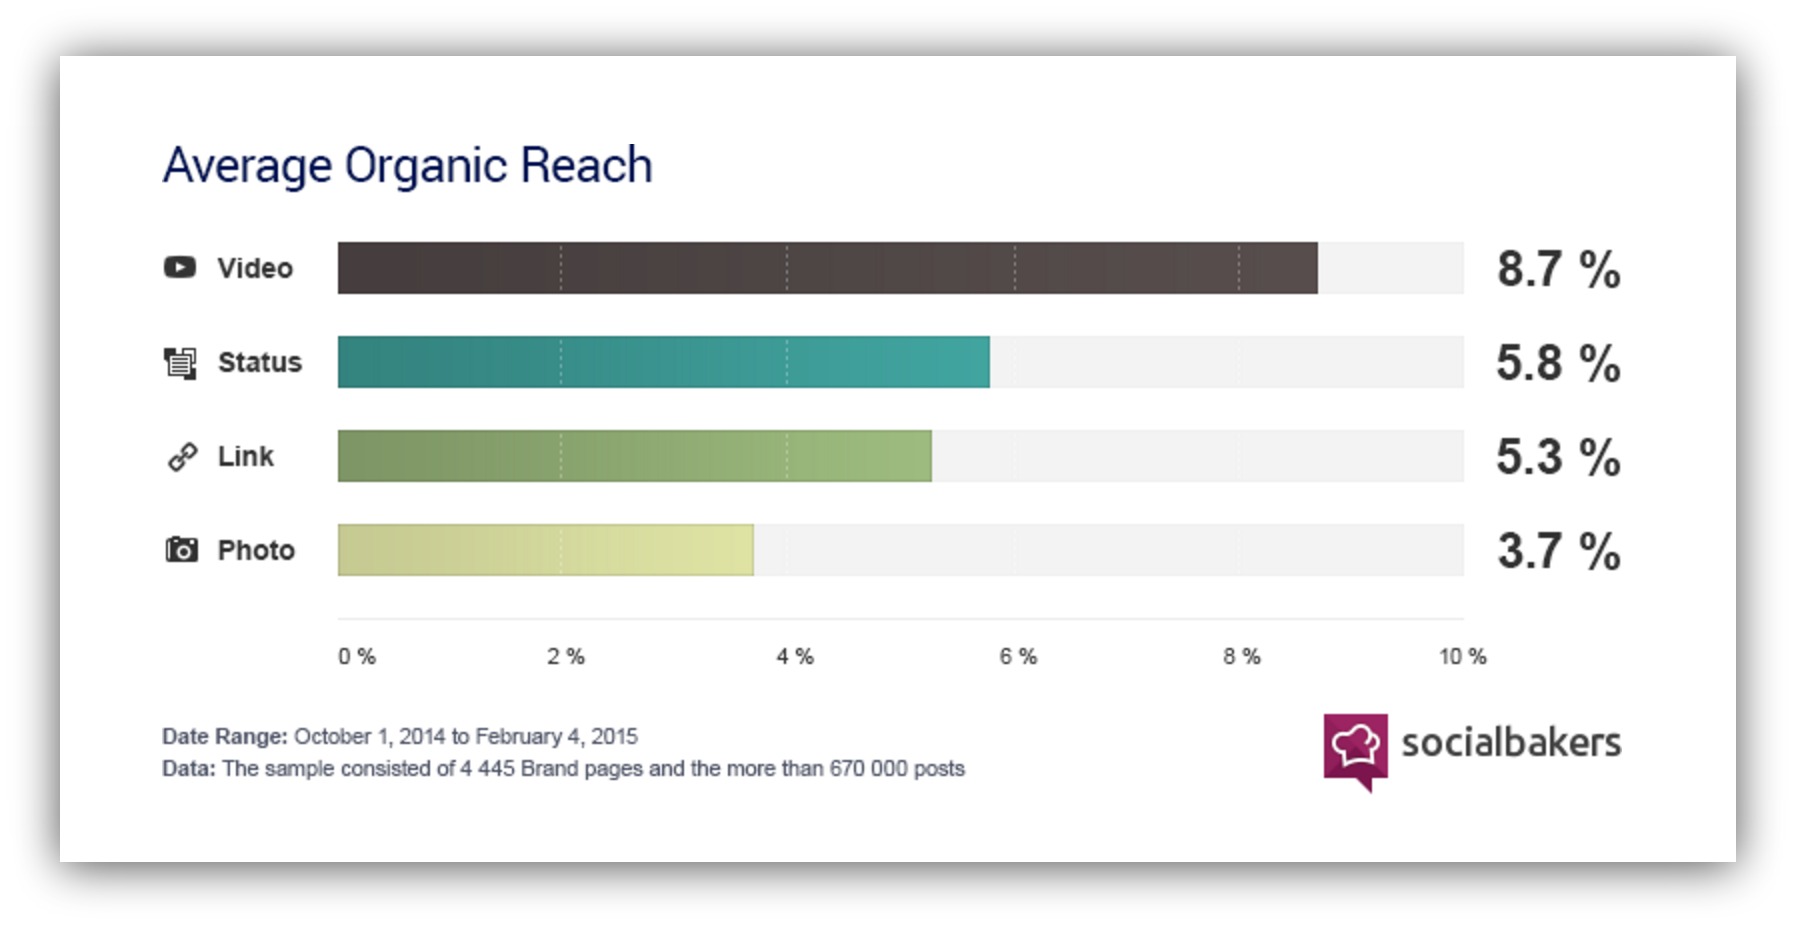 Screenshot showing avg organic reach for different types of posts